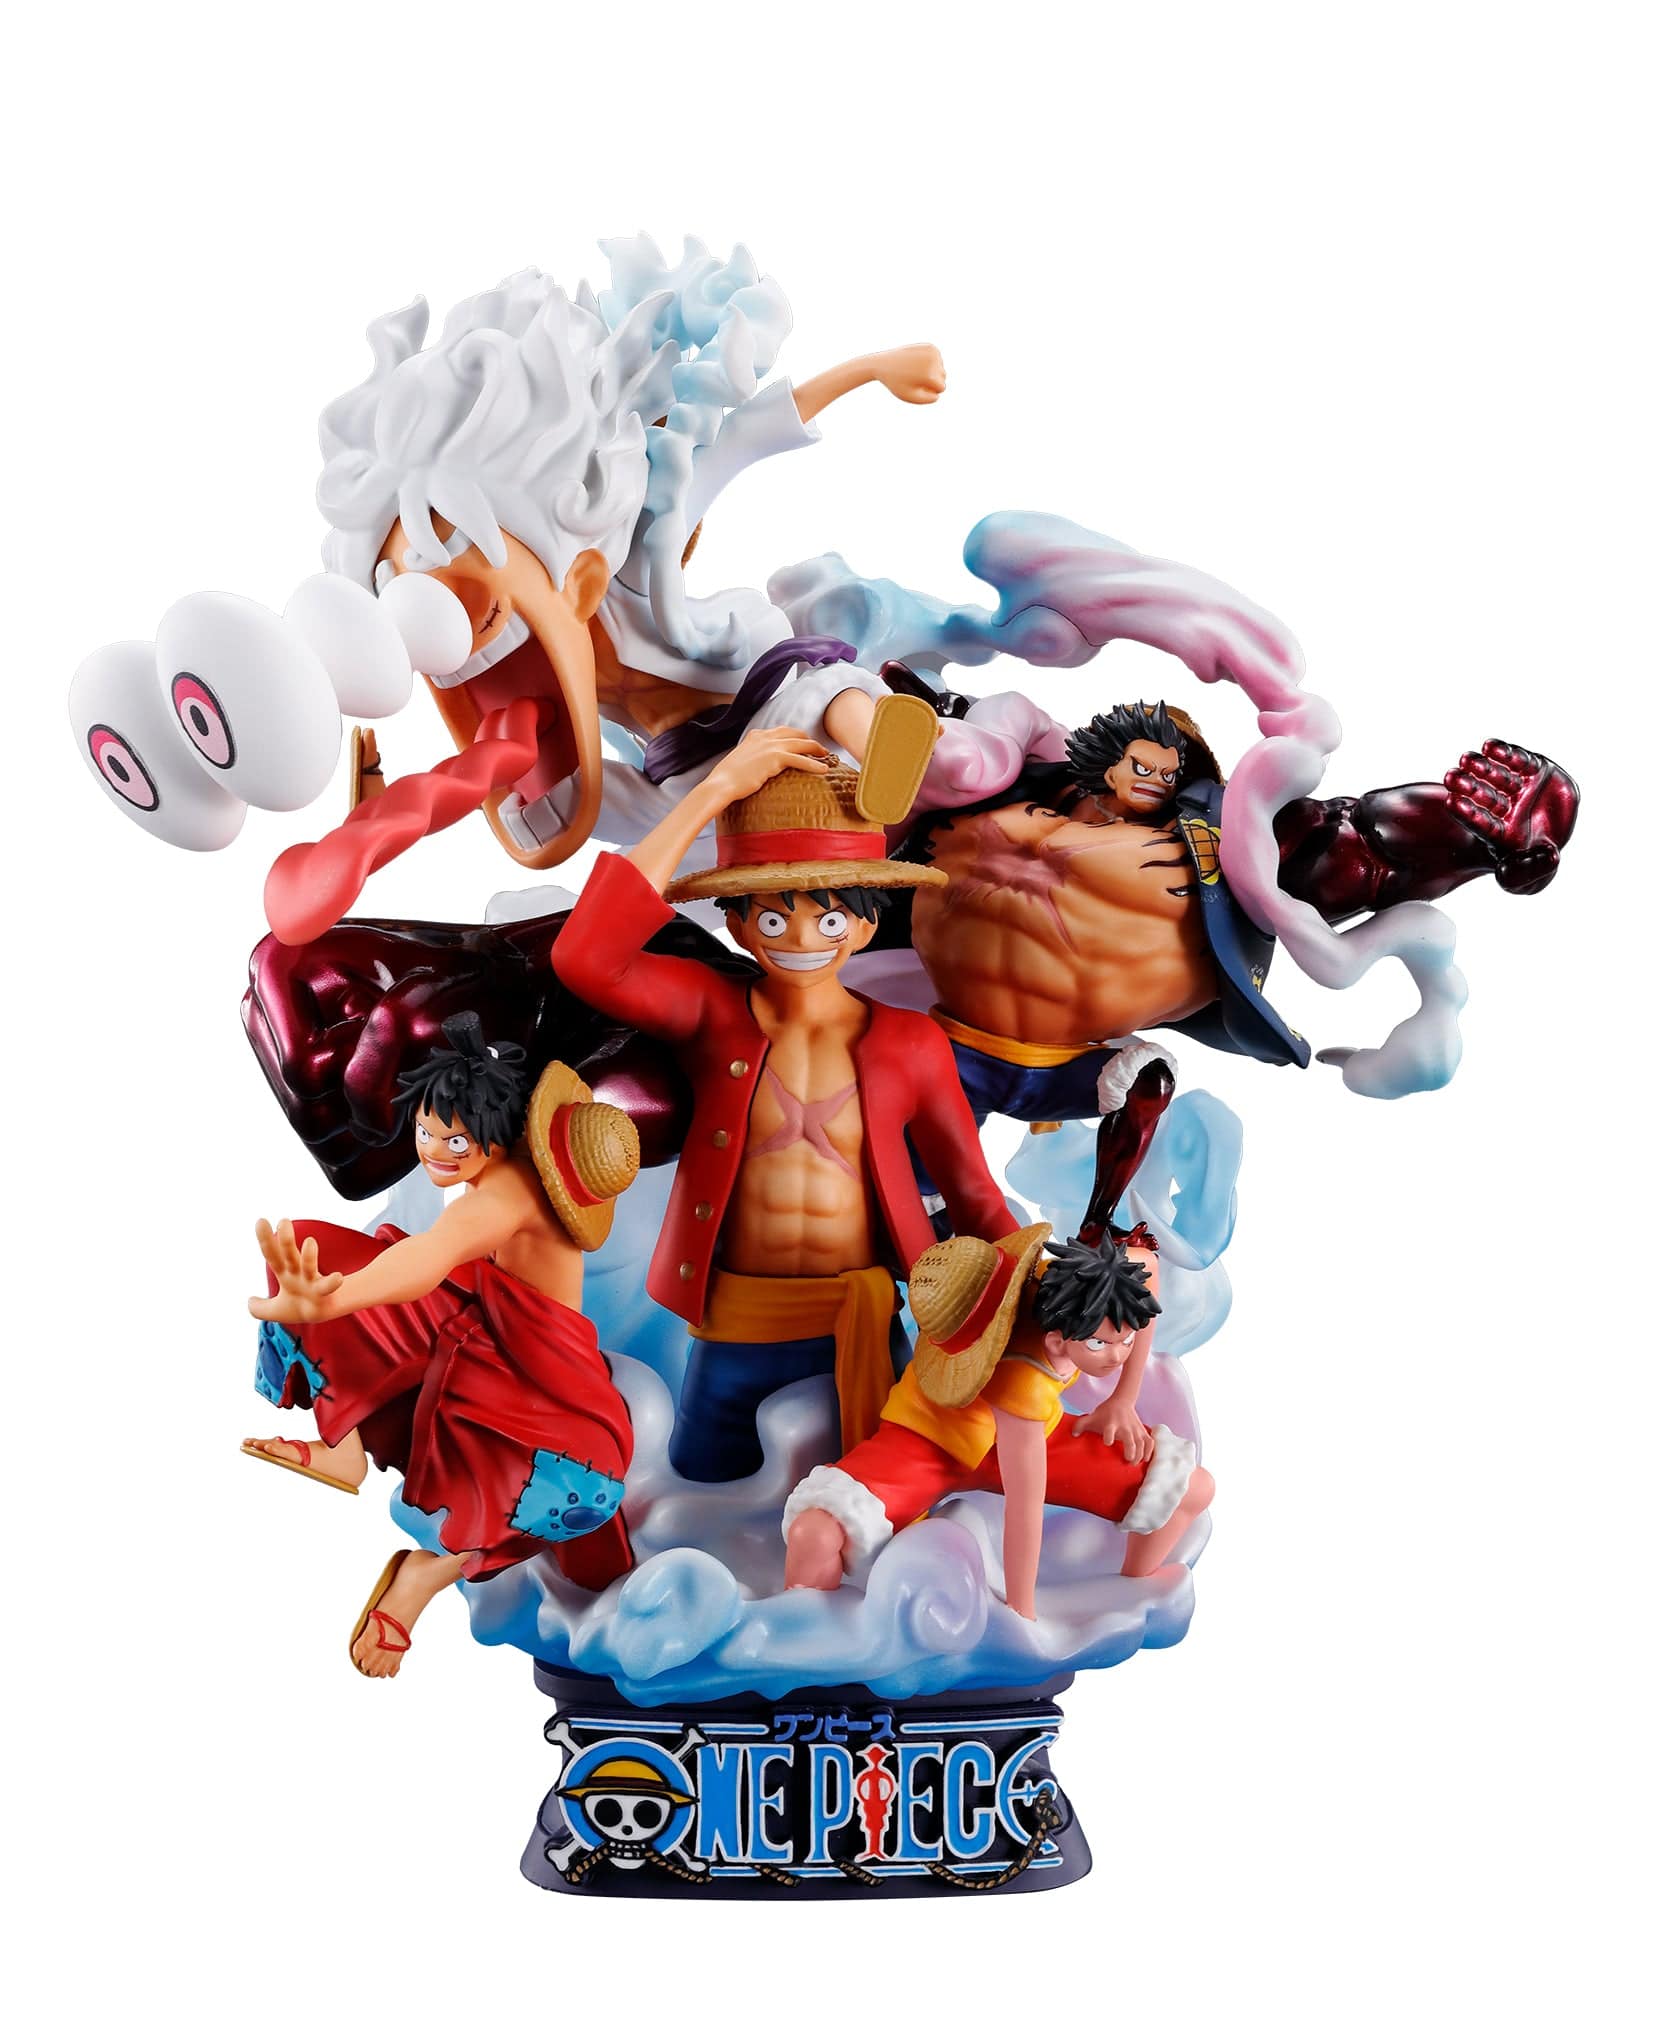 Megahouse PETITRAMA SERIES DX LOGBOX ONE PIECE RE BIRTH 02 Luffy Special